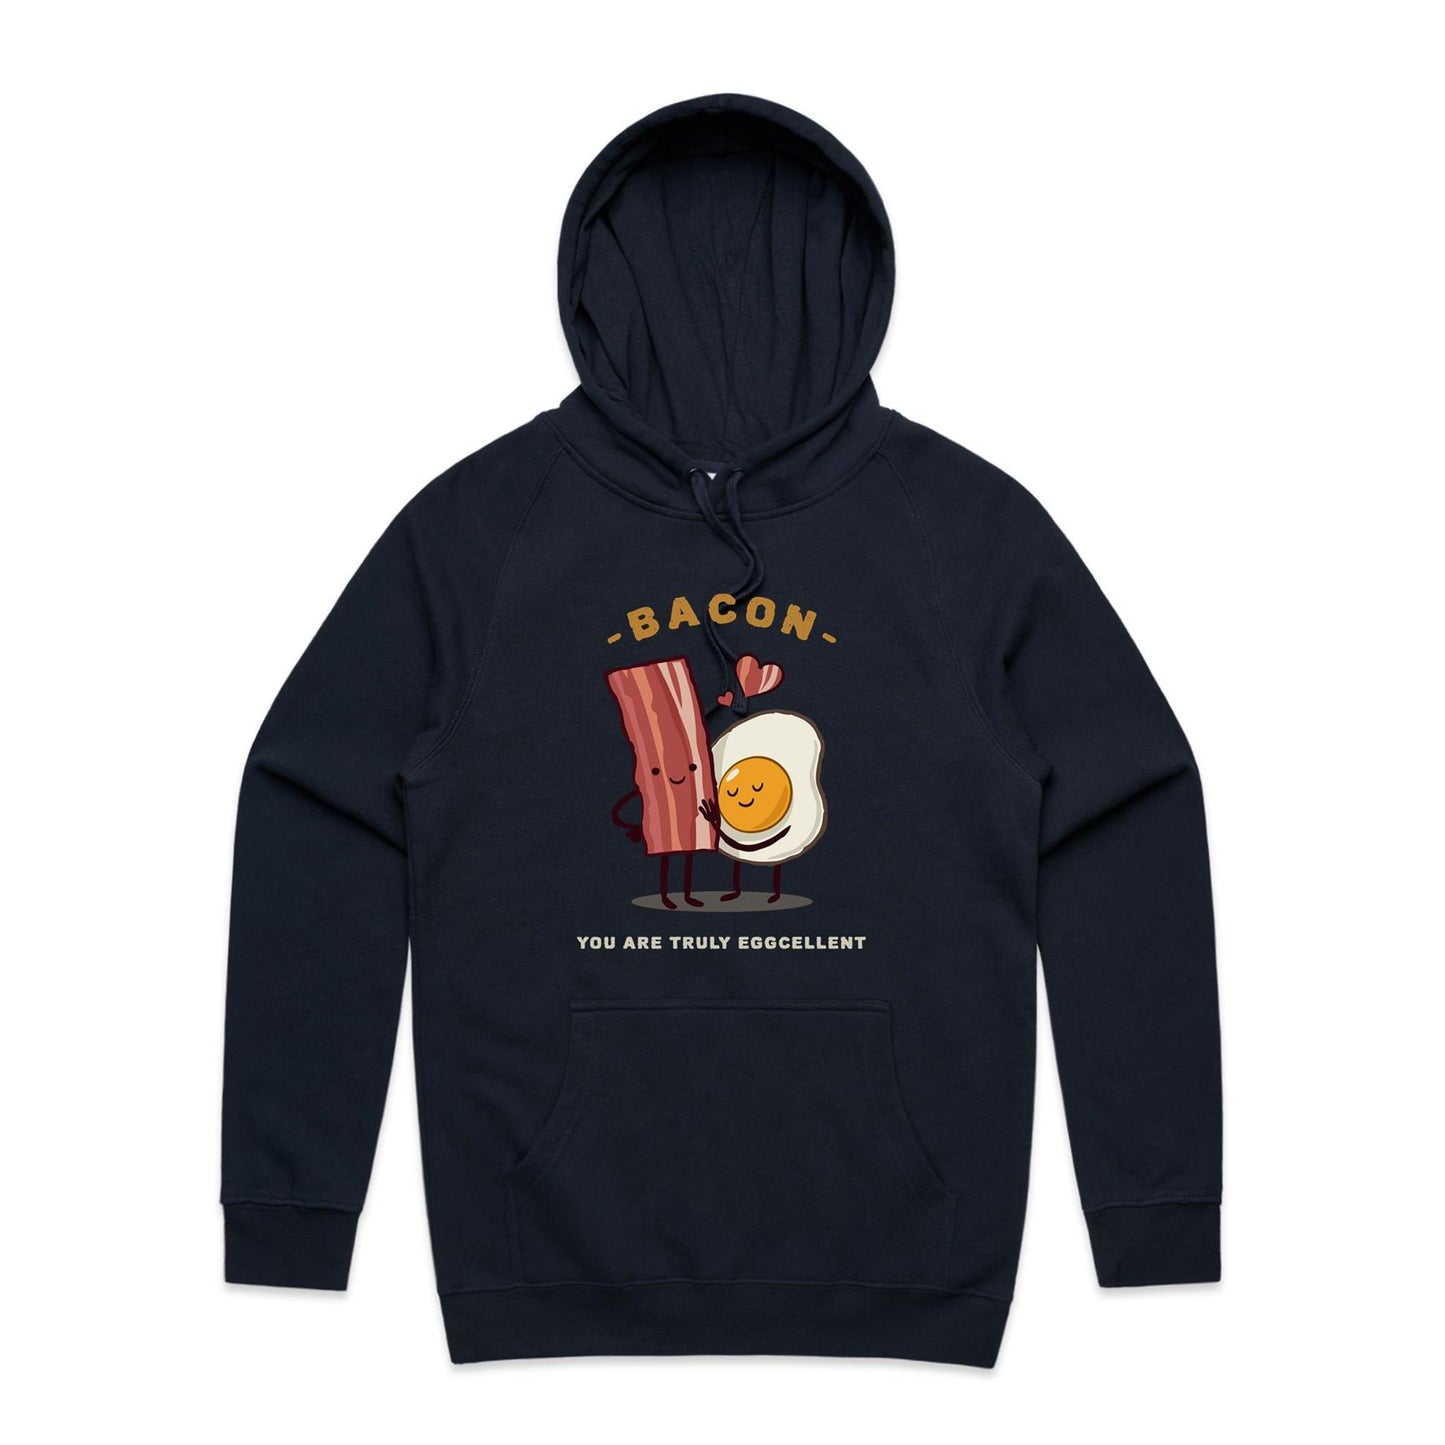 Bacon, You Are Truly Eggcellent - Supply Hood Navy Mens Supply Hoodie Food